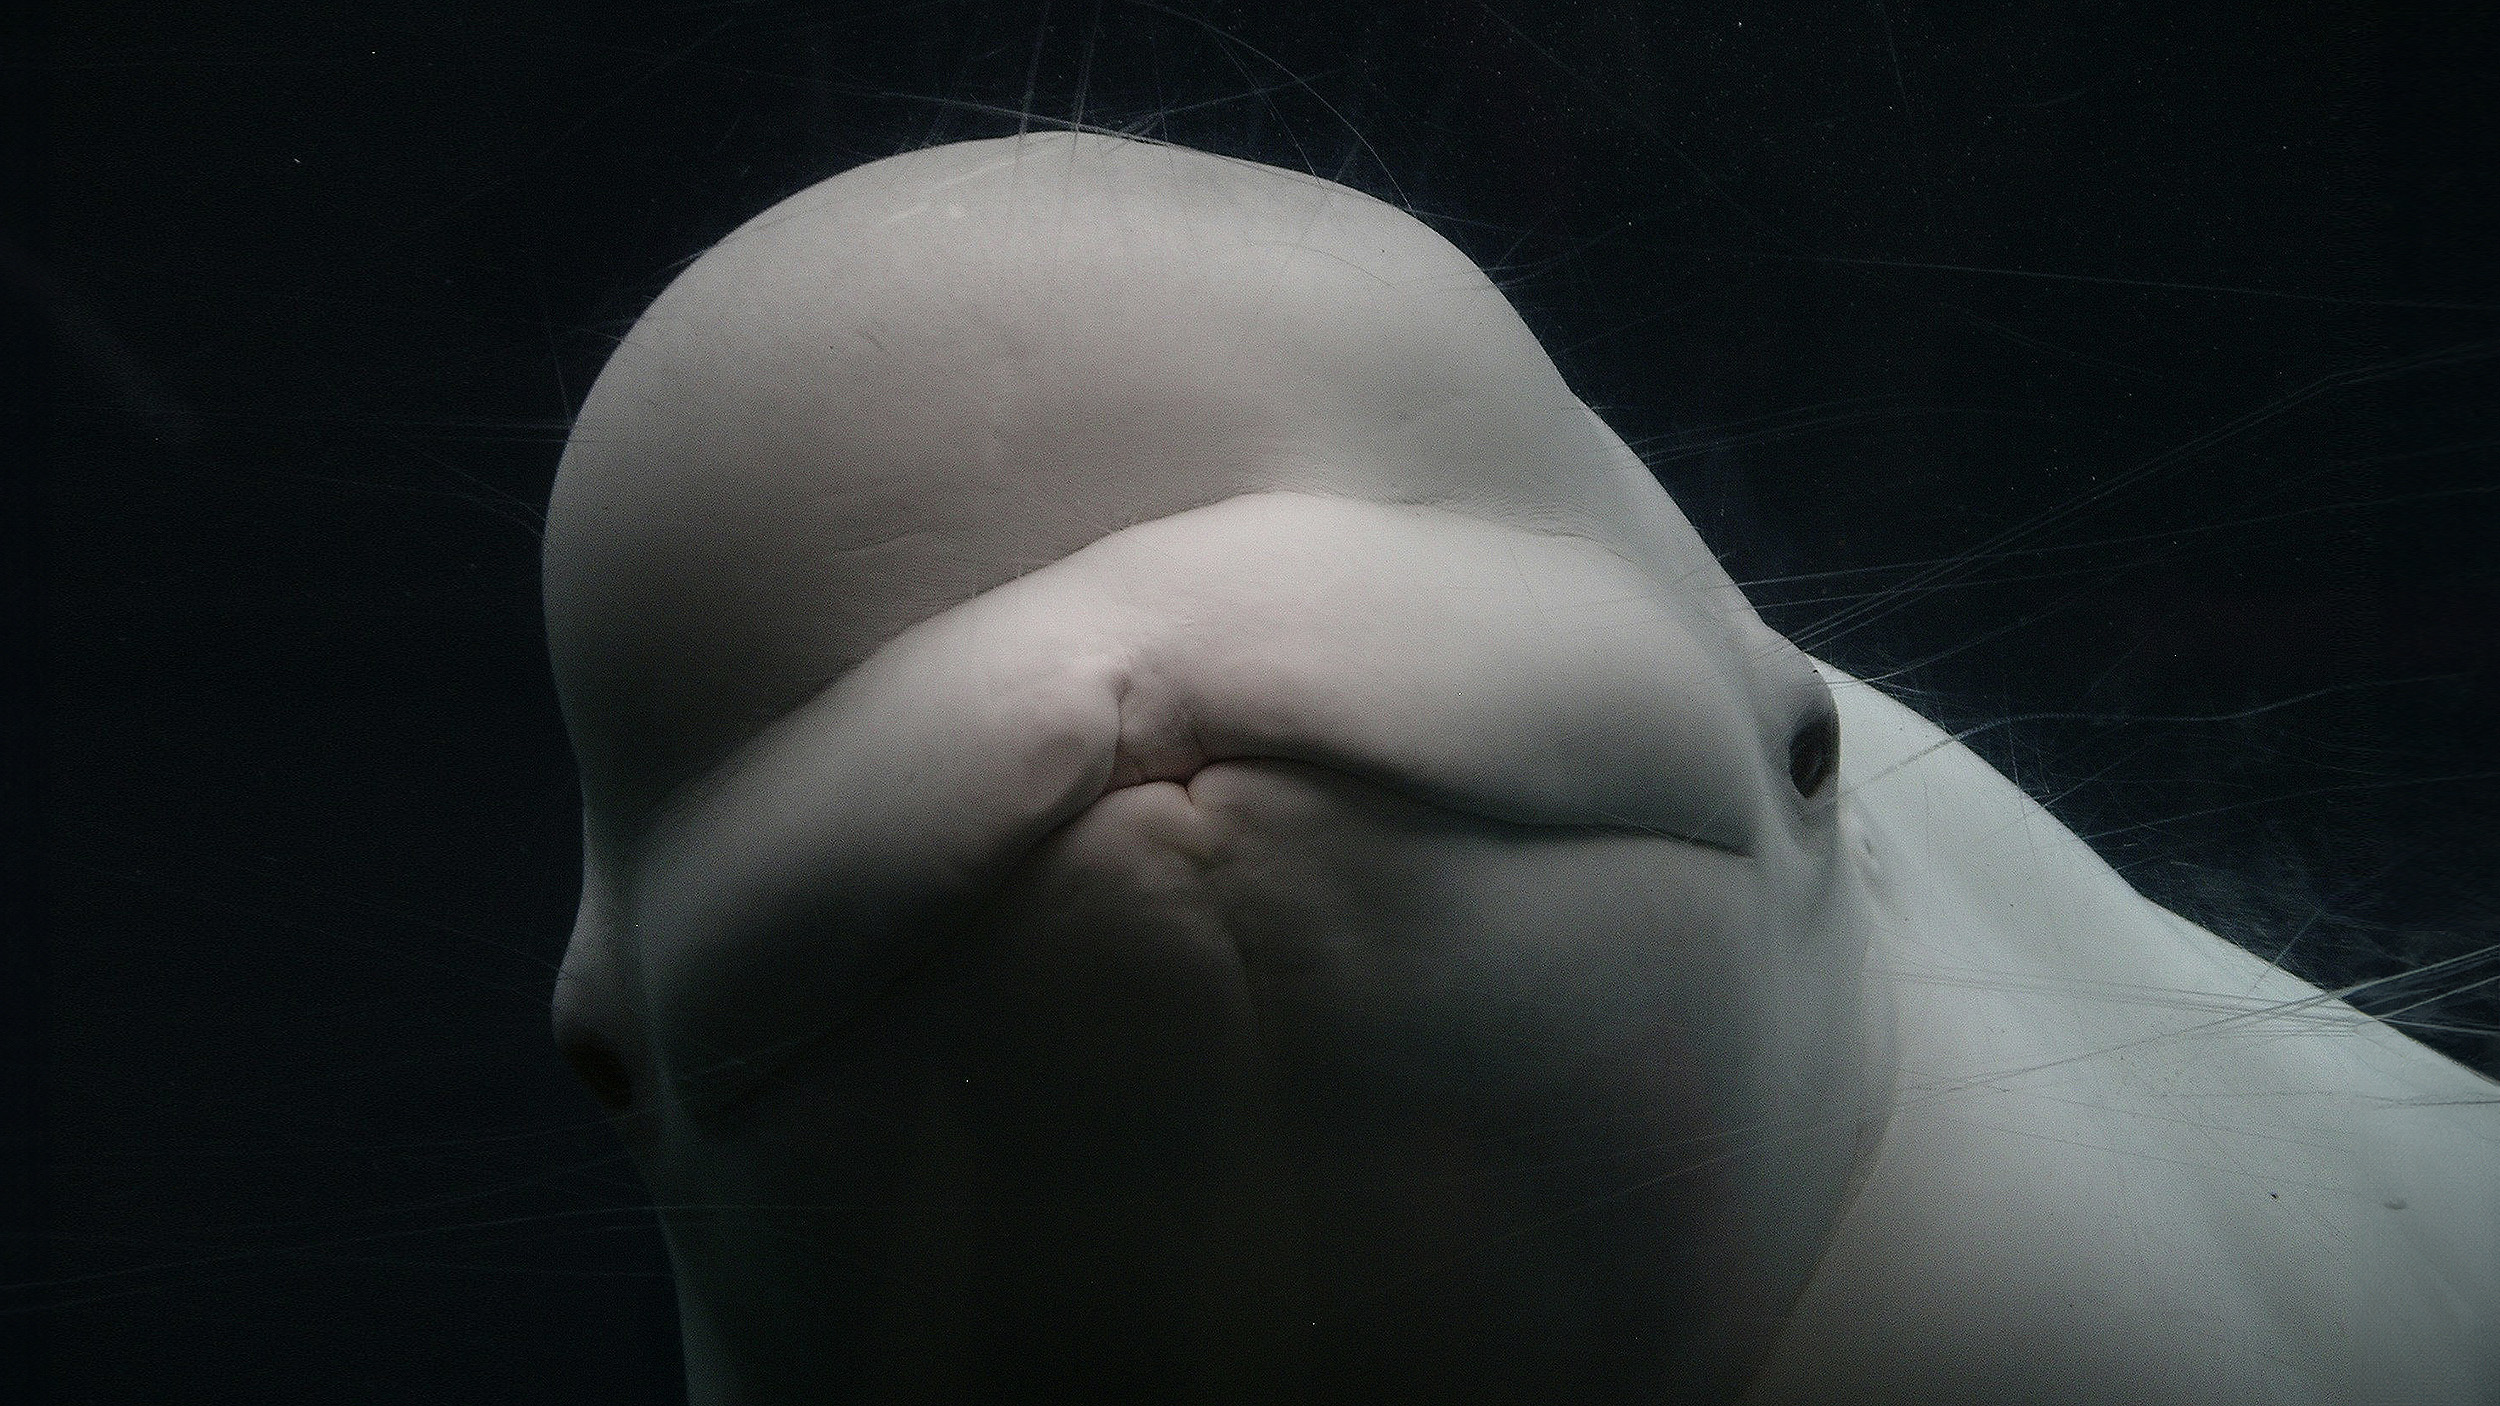 Close-up of a beluga whale's head with visible facial creases, communicating in an alien language, against a dark water background.